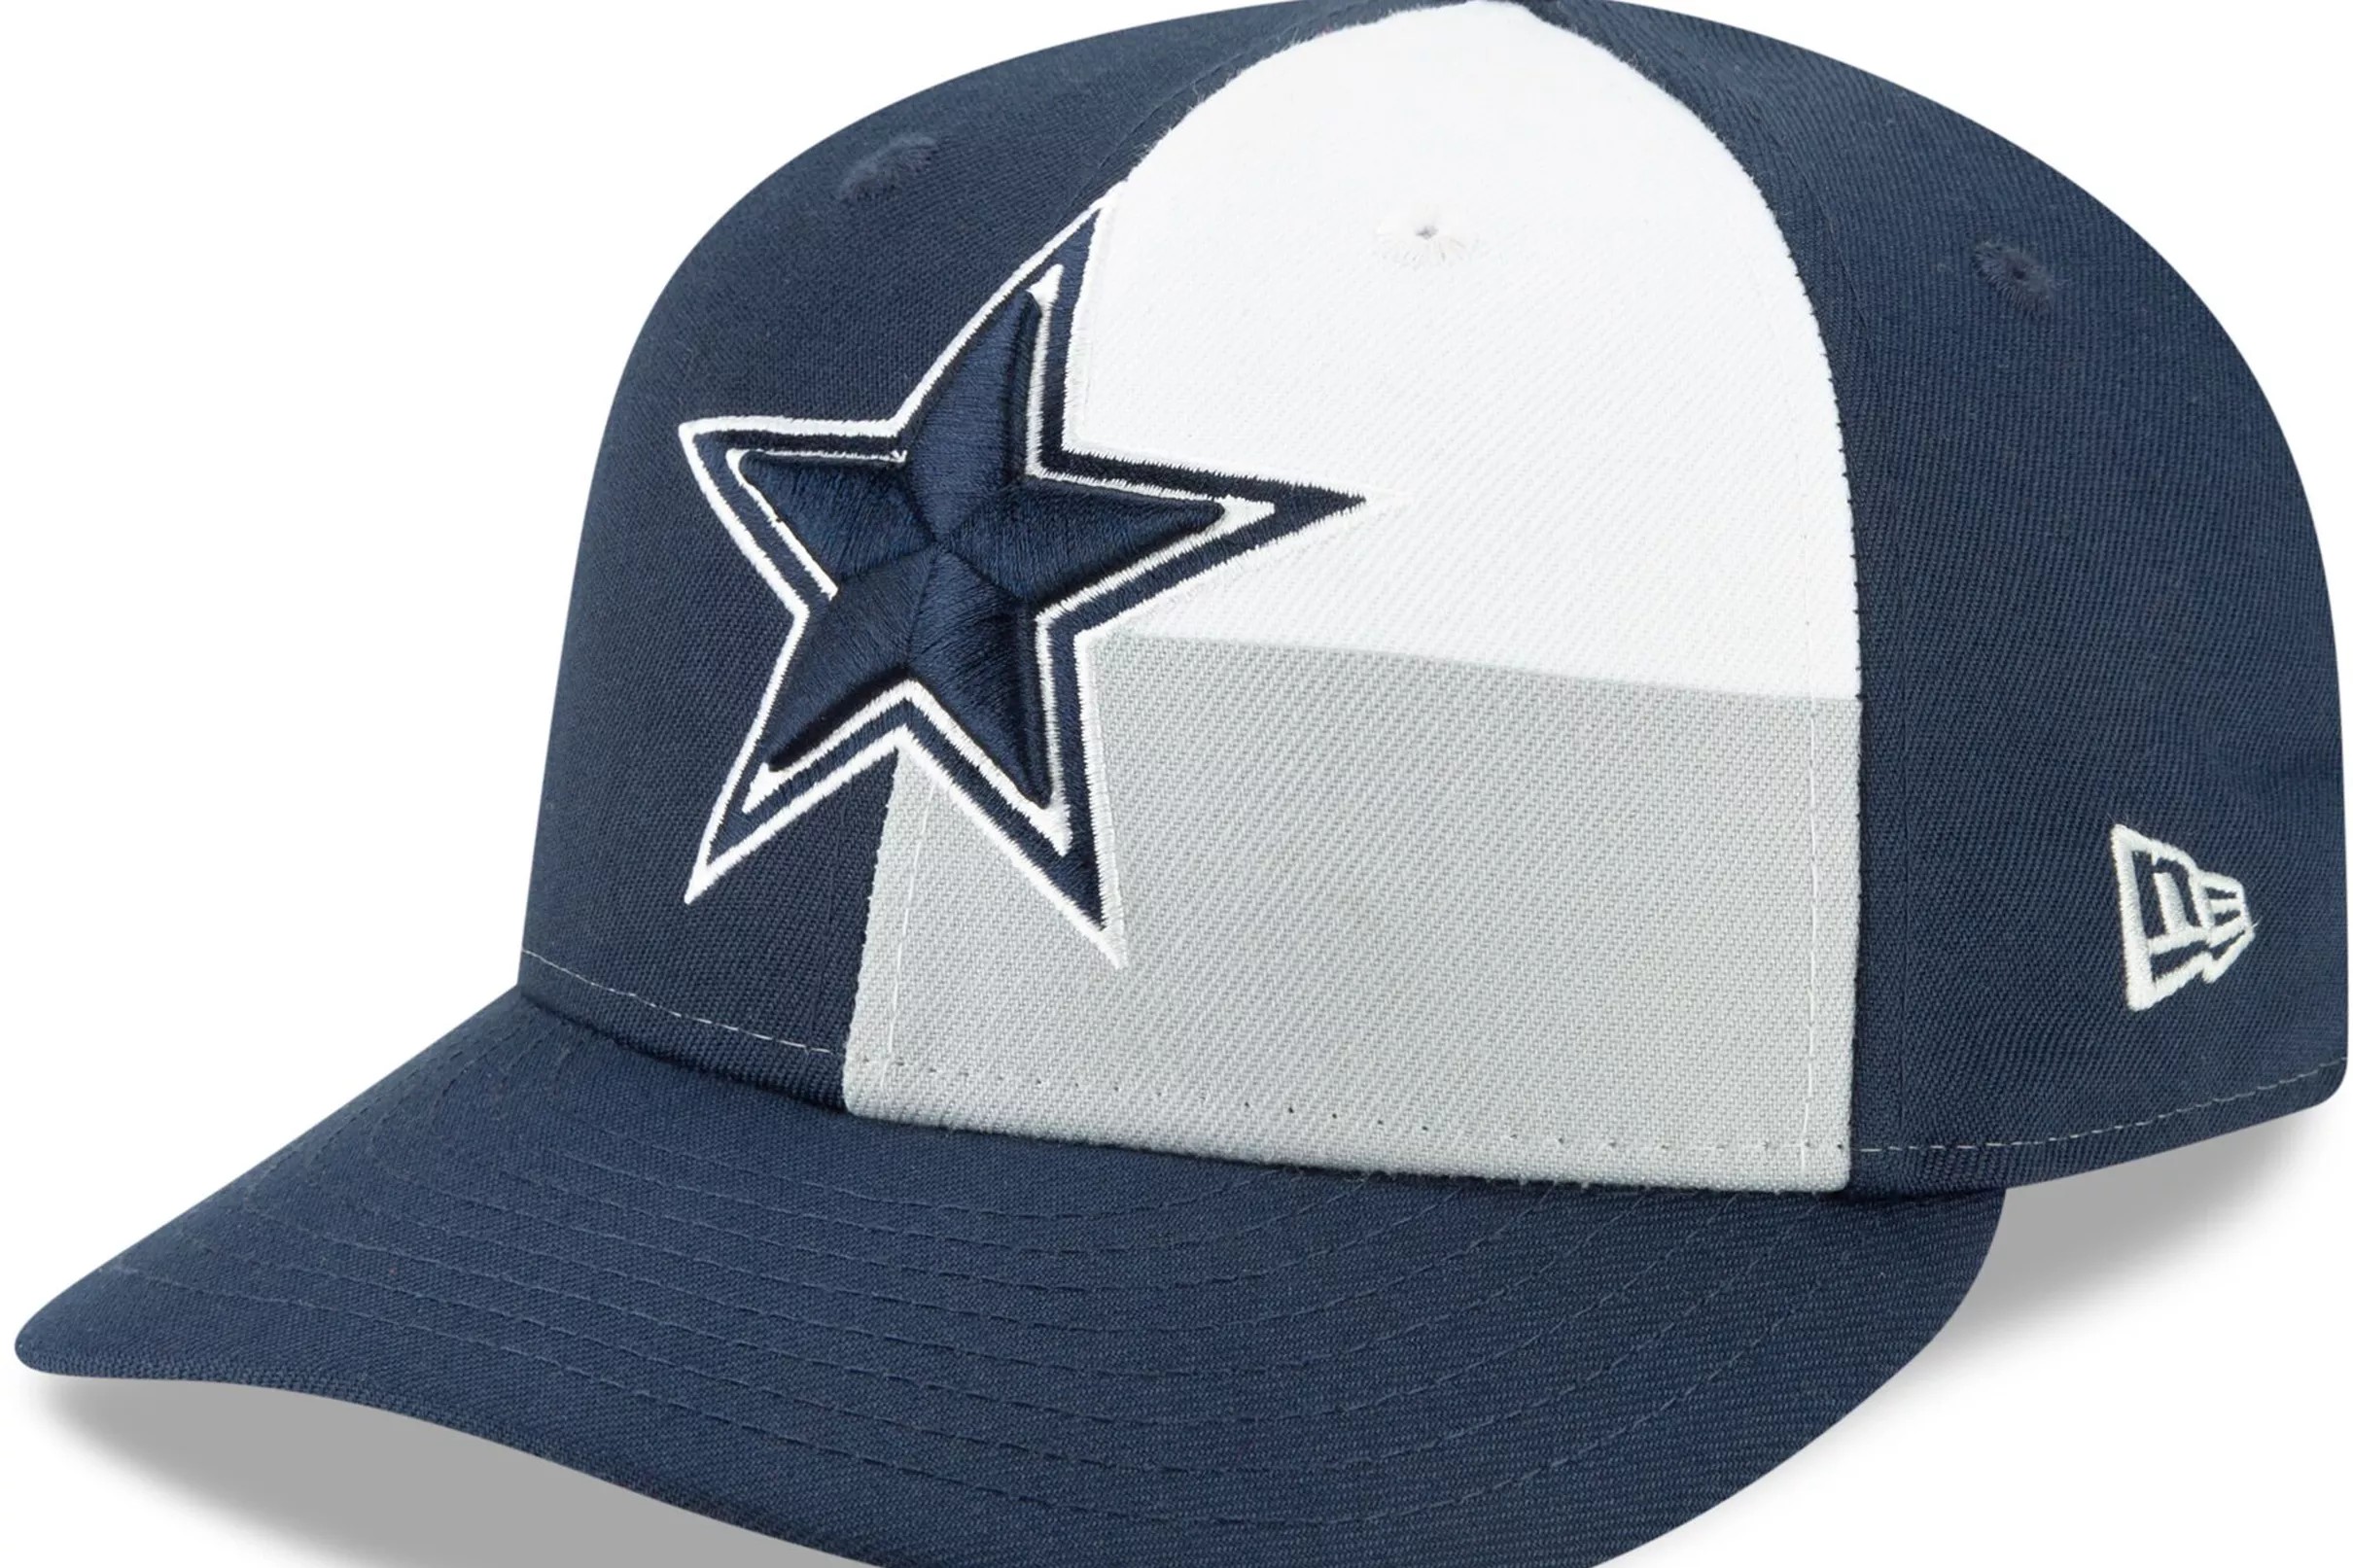 Dallas Cowboys Draft Hats are officially available, and they’ll remind